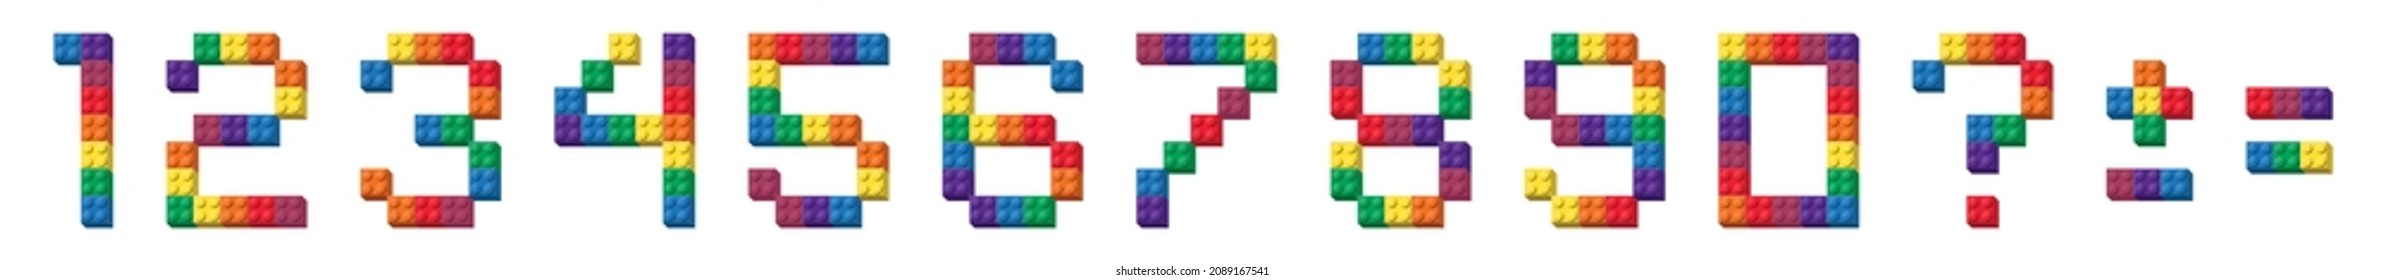  colorful brick block toy and game, Building cube fonts like Lego, 123 typography numbers for poster, banner, logo, print for kids.